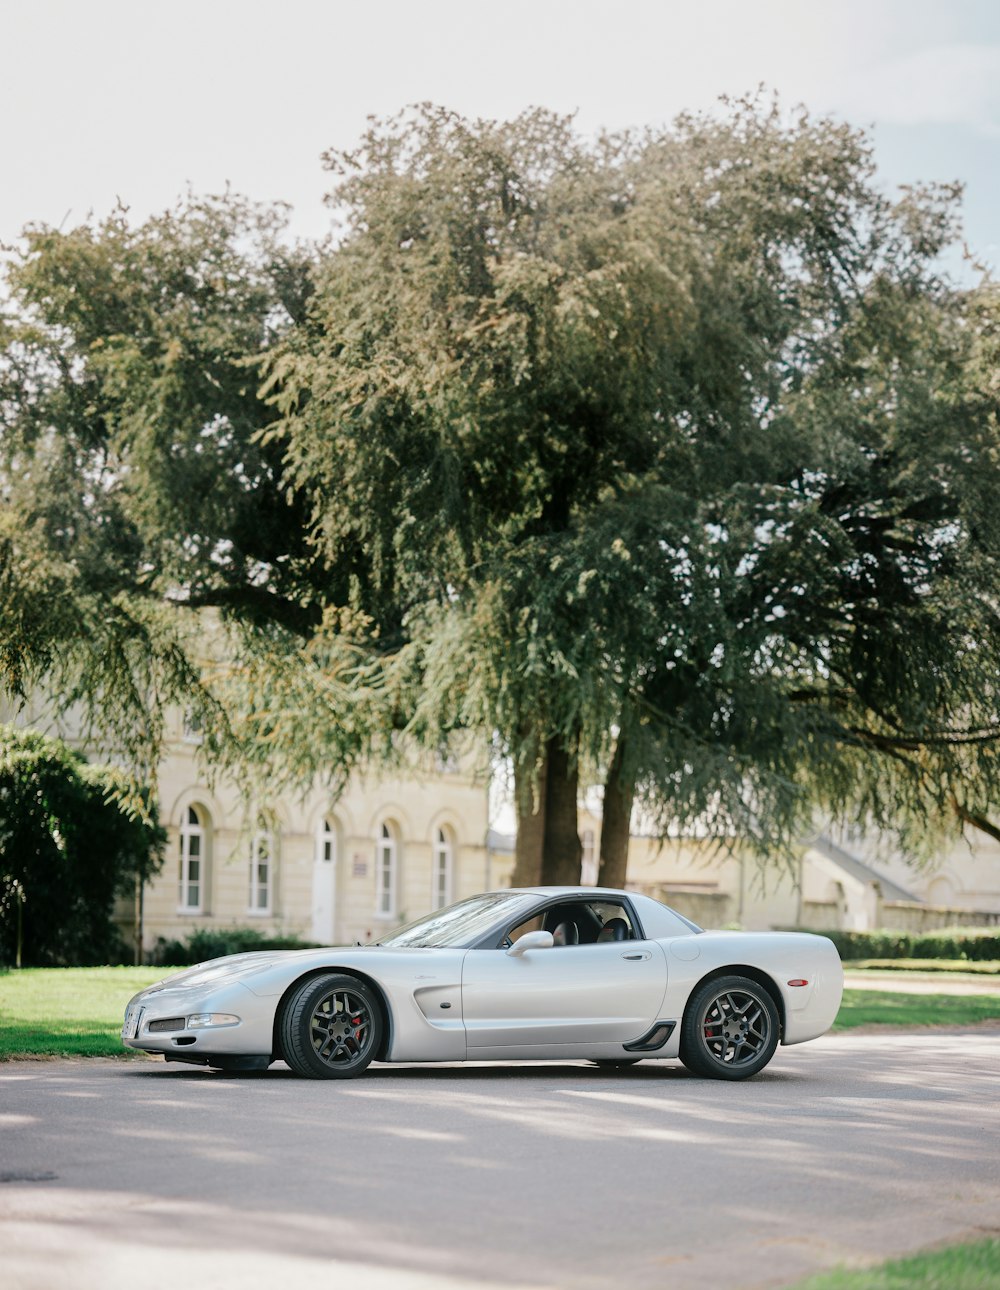 a silver sports car parked on the side of the road